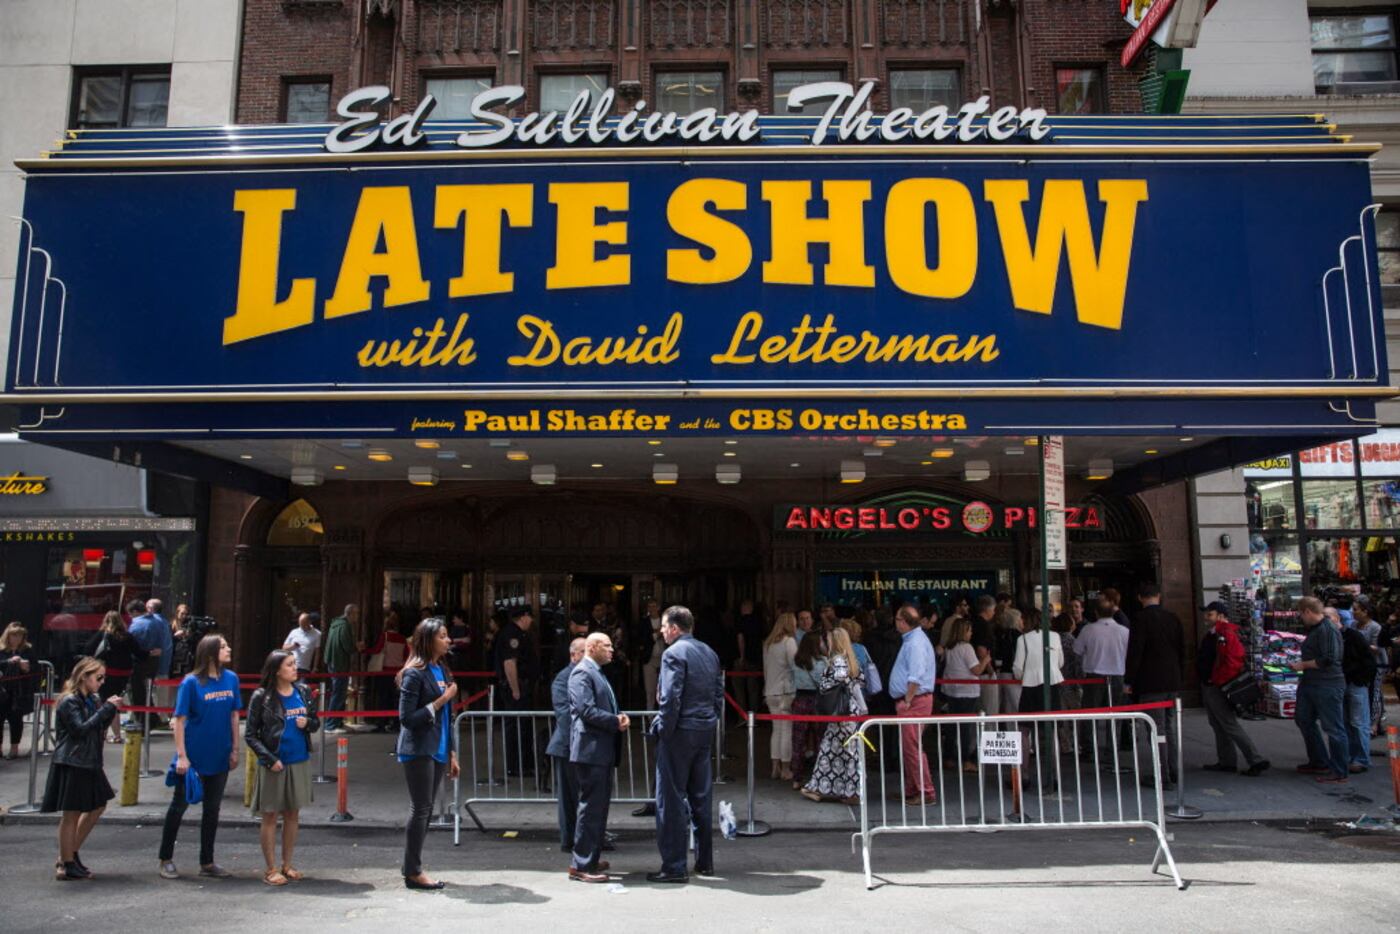 Fans of David Letterman, members of the media, security agents, passersby and employees of...